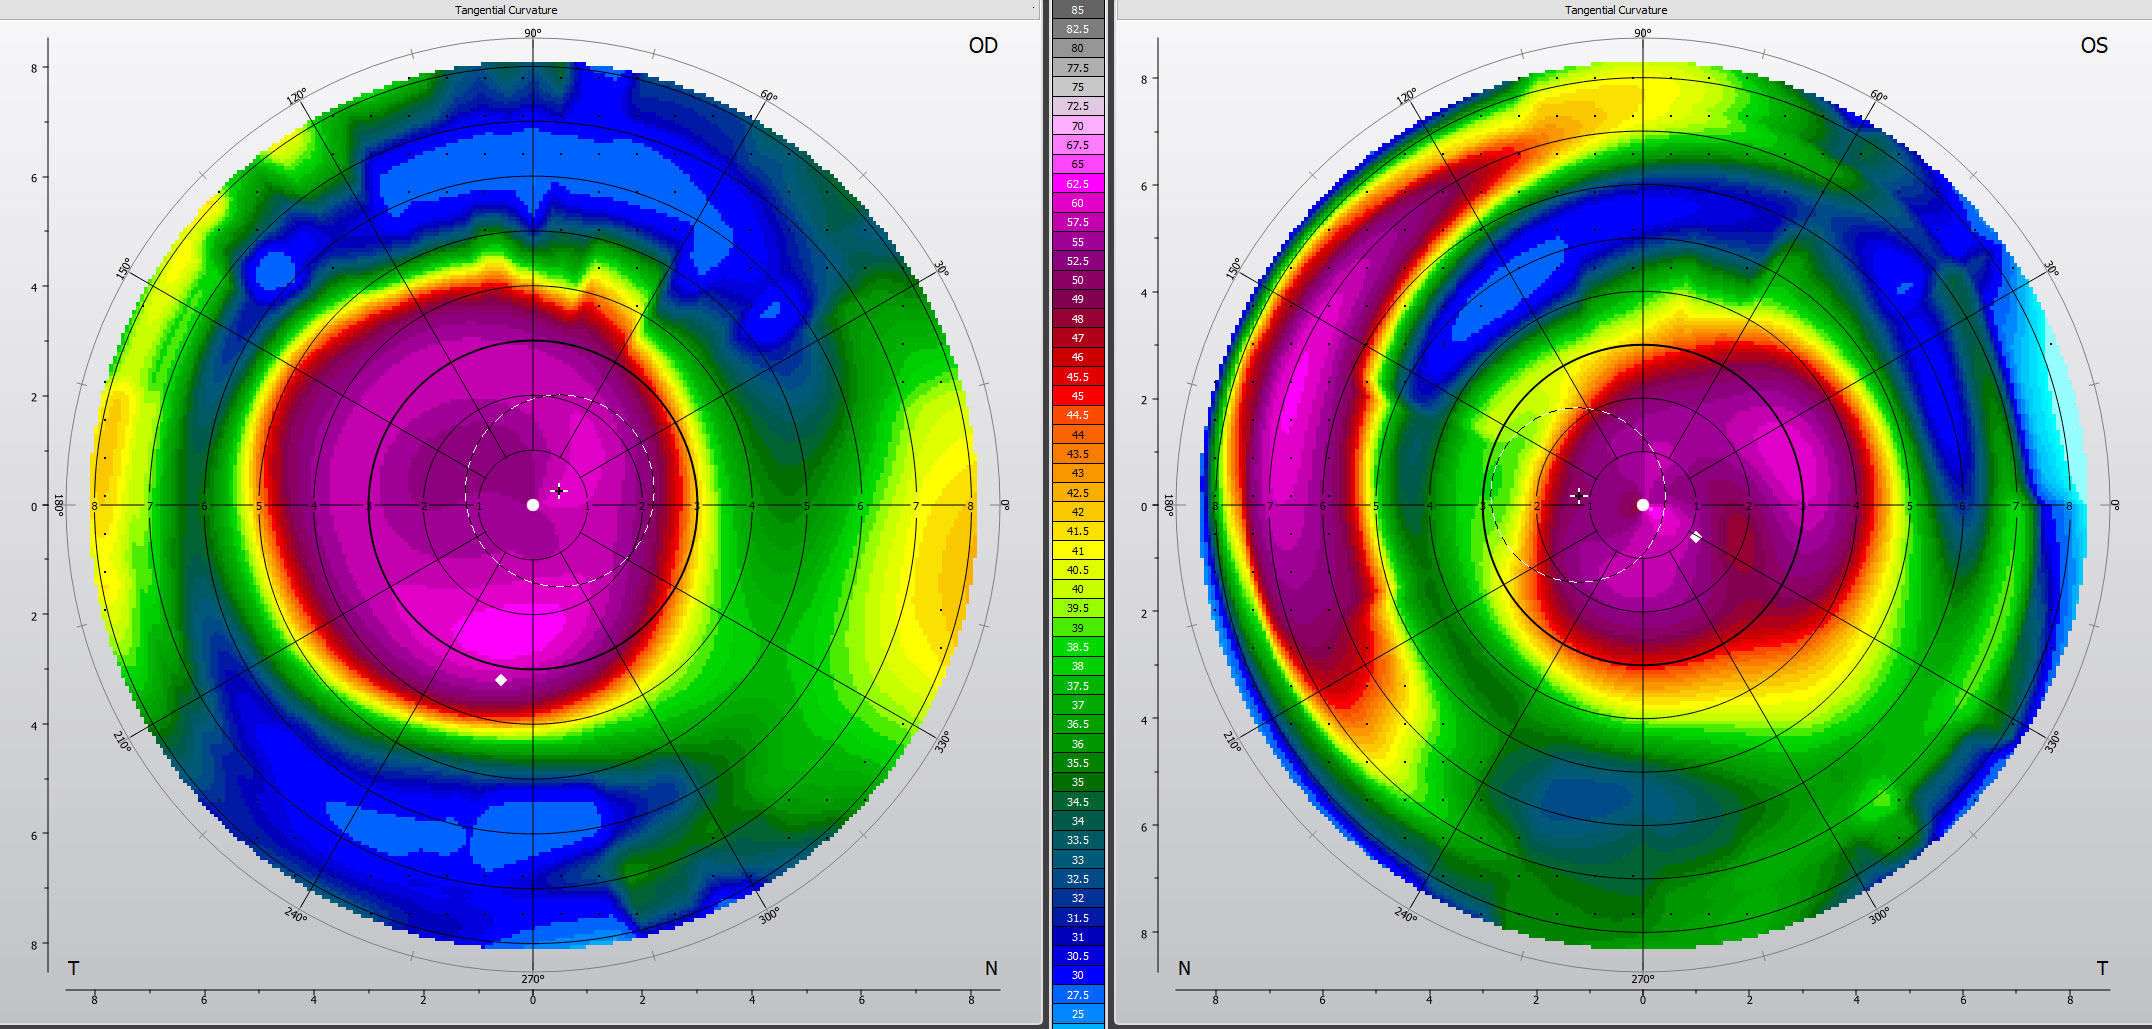 Corneal topography of advanced keratoconus OU successfully fit with Kerasoft IC Toric lenses.